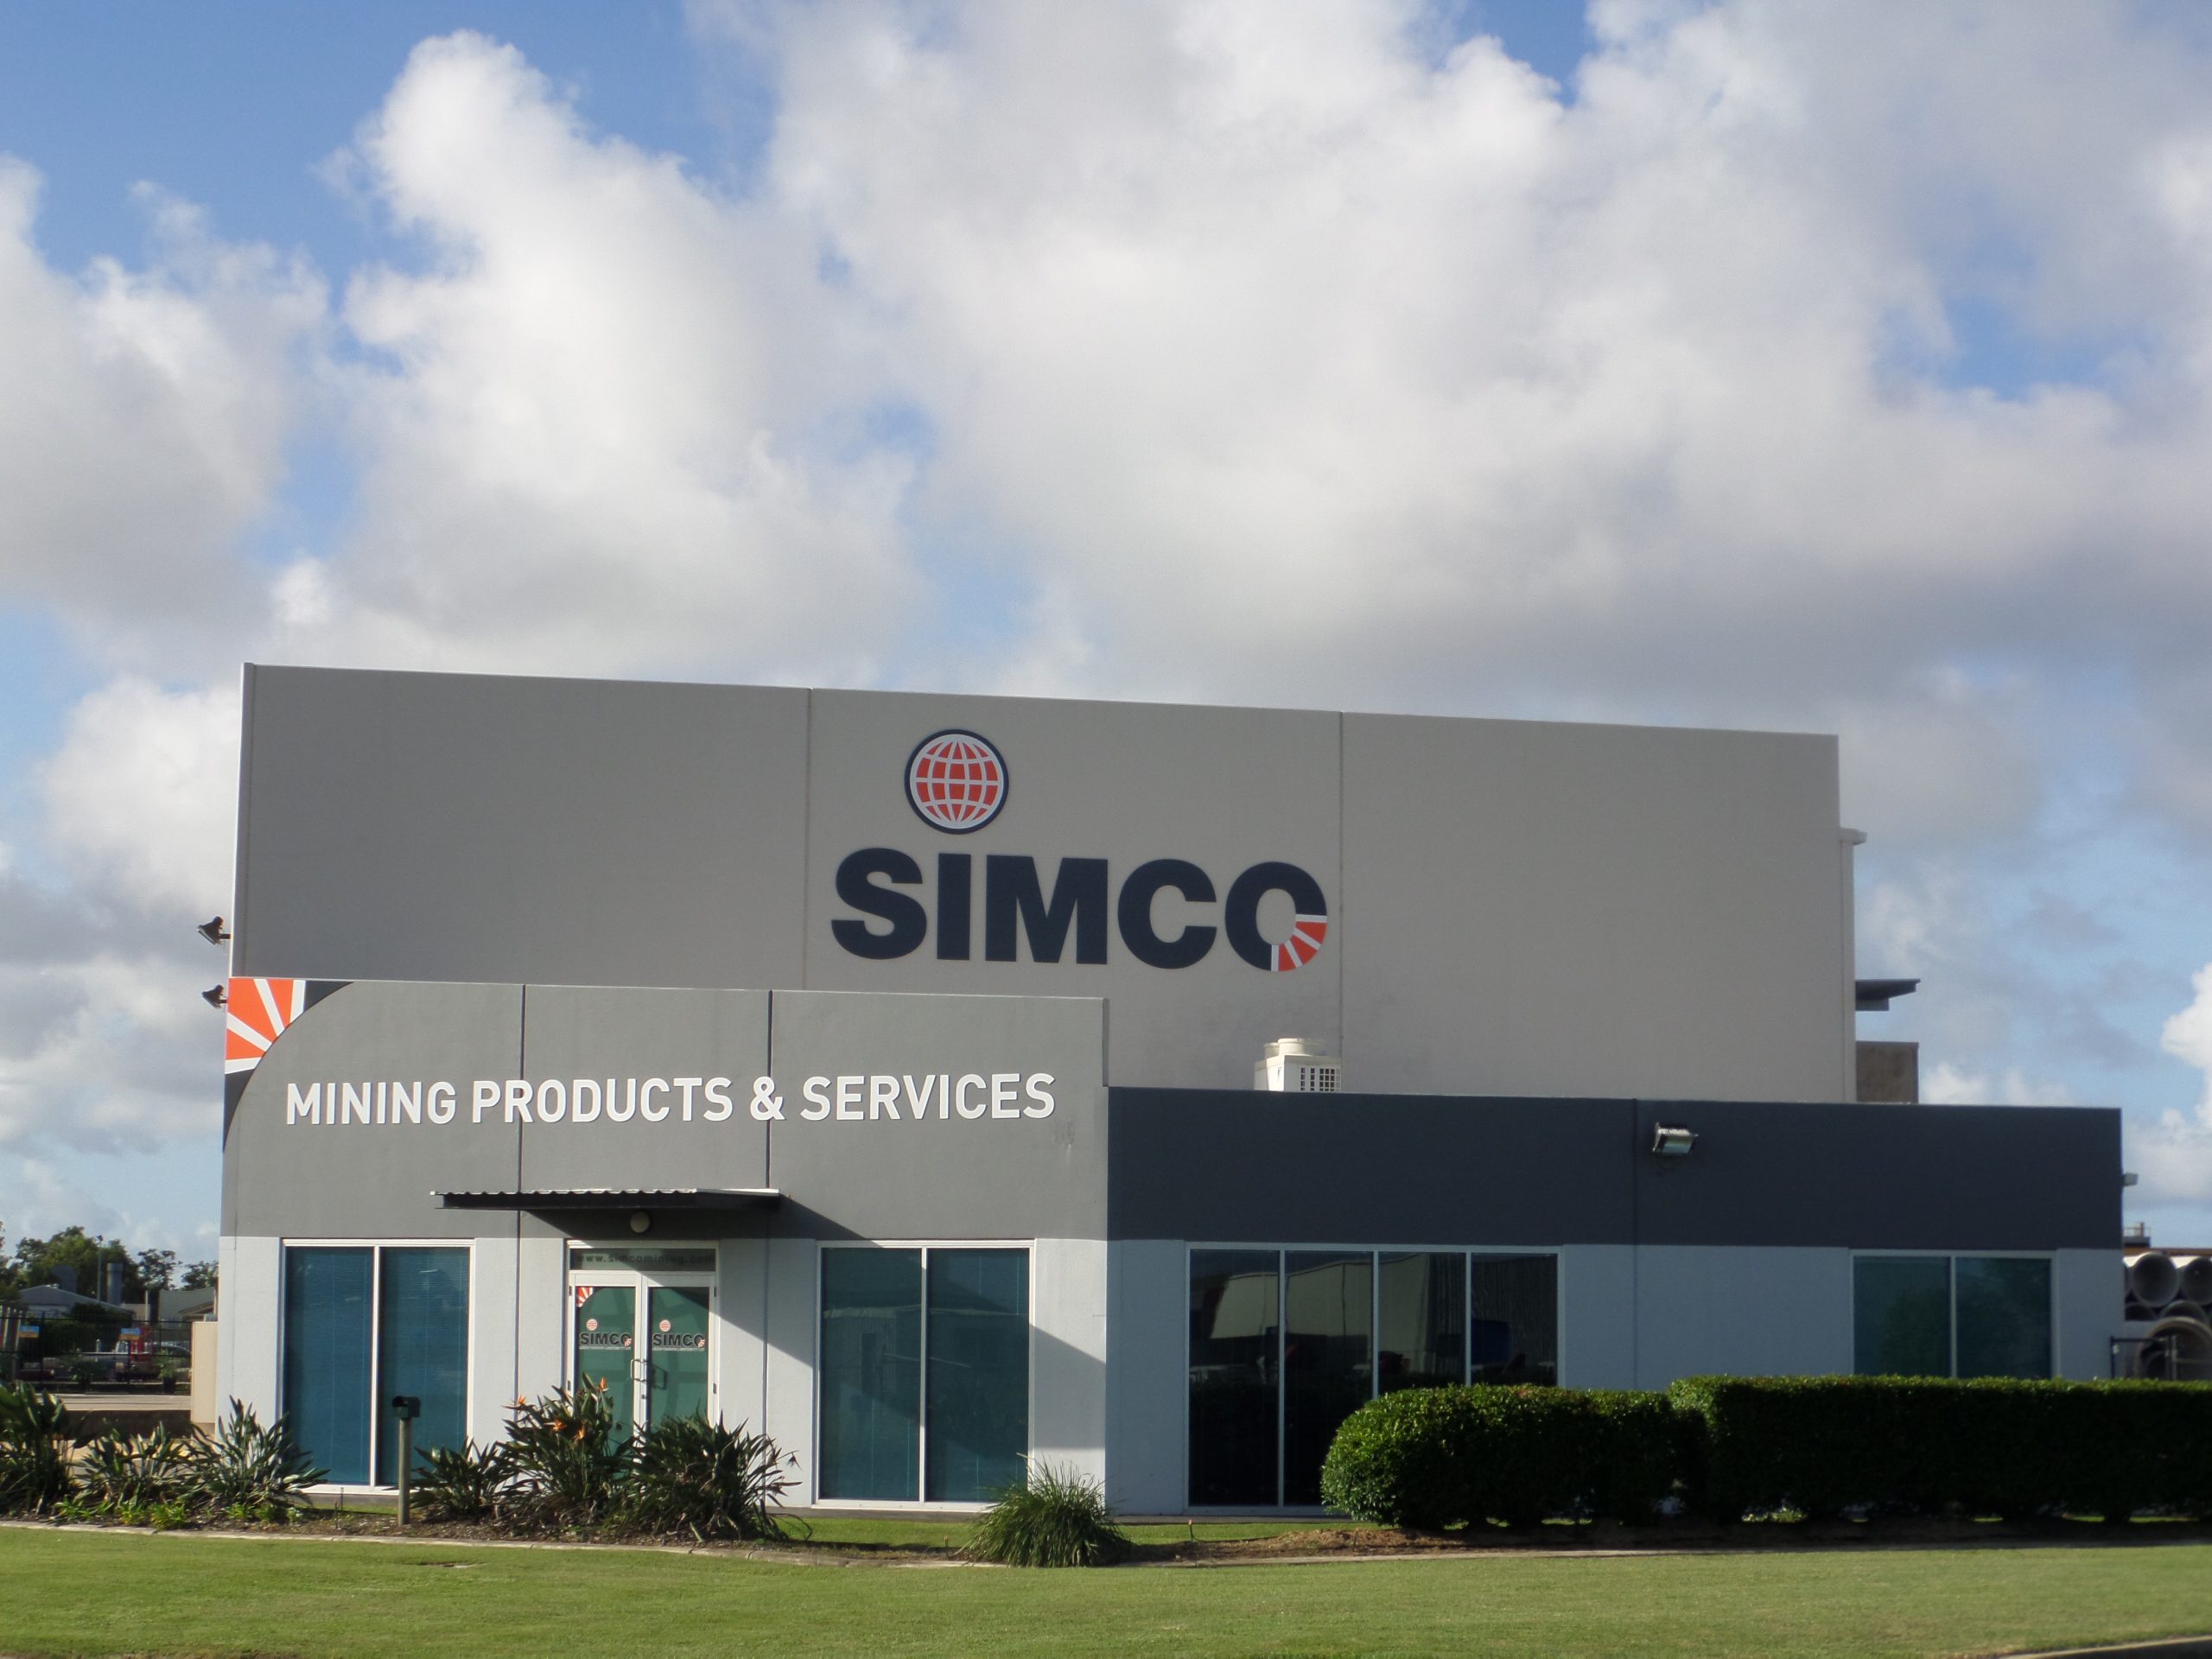 SIMCO Mining Products & Services